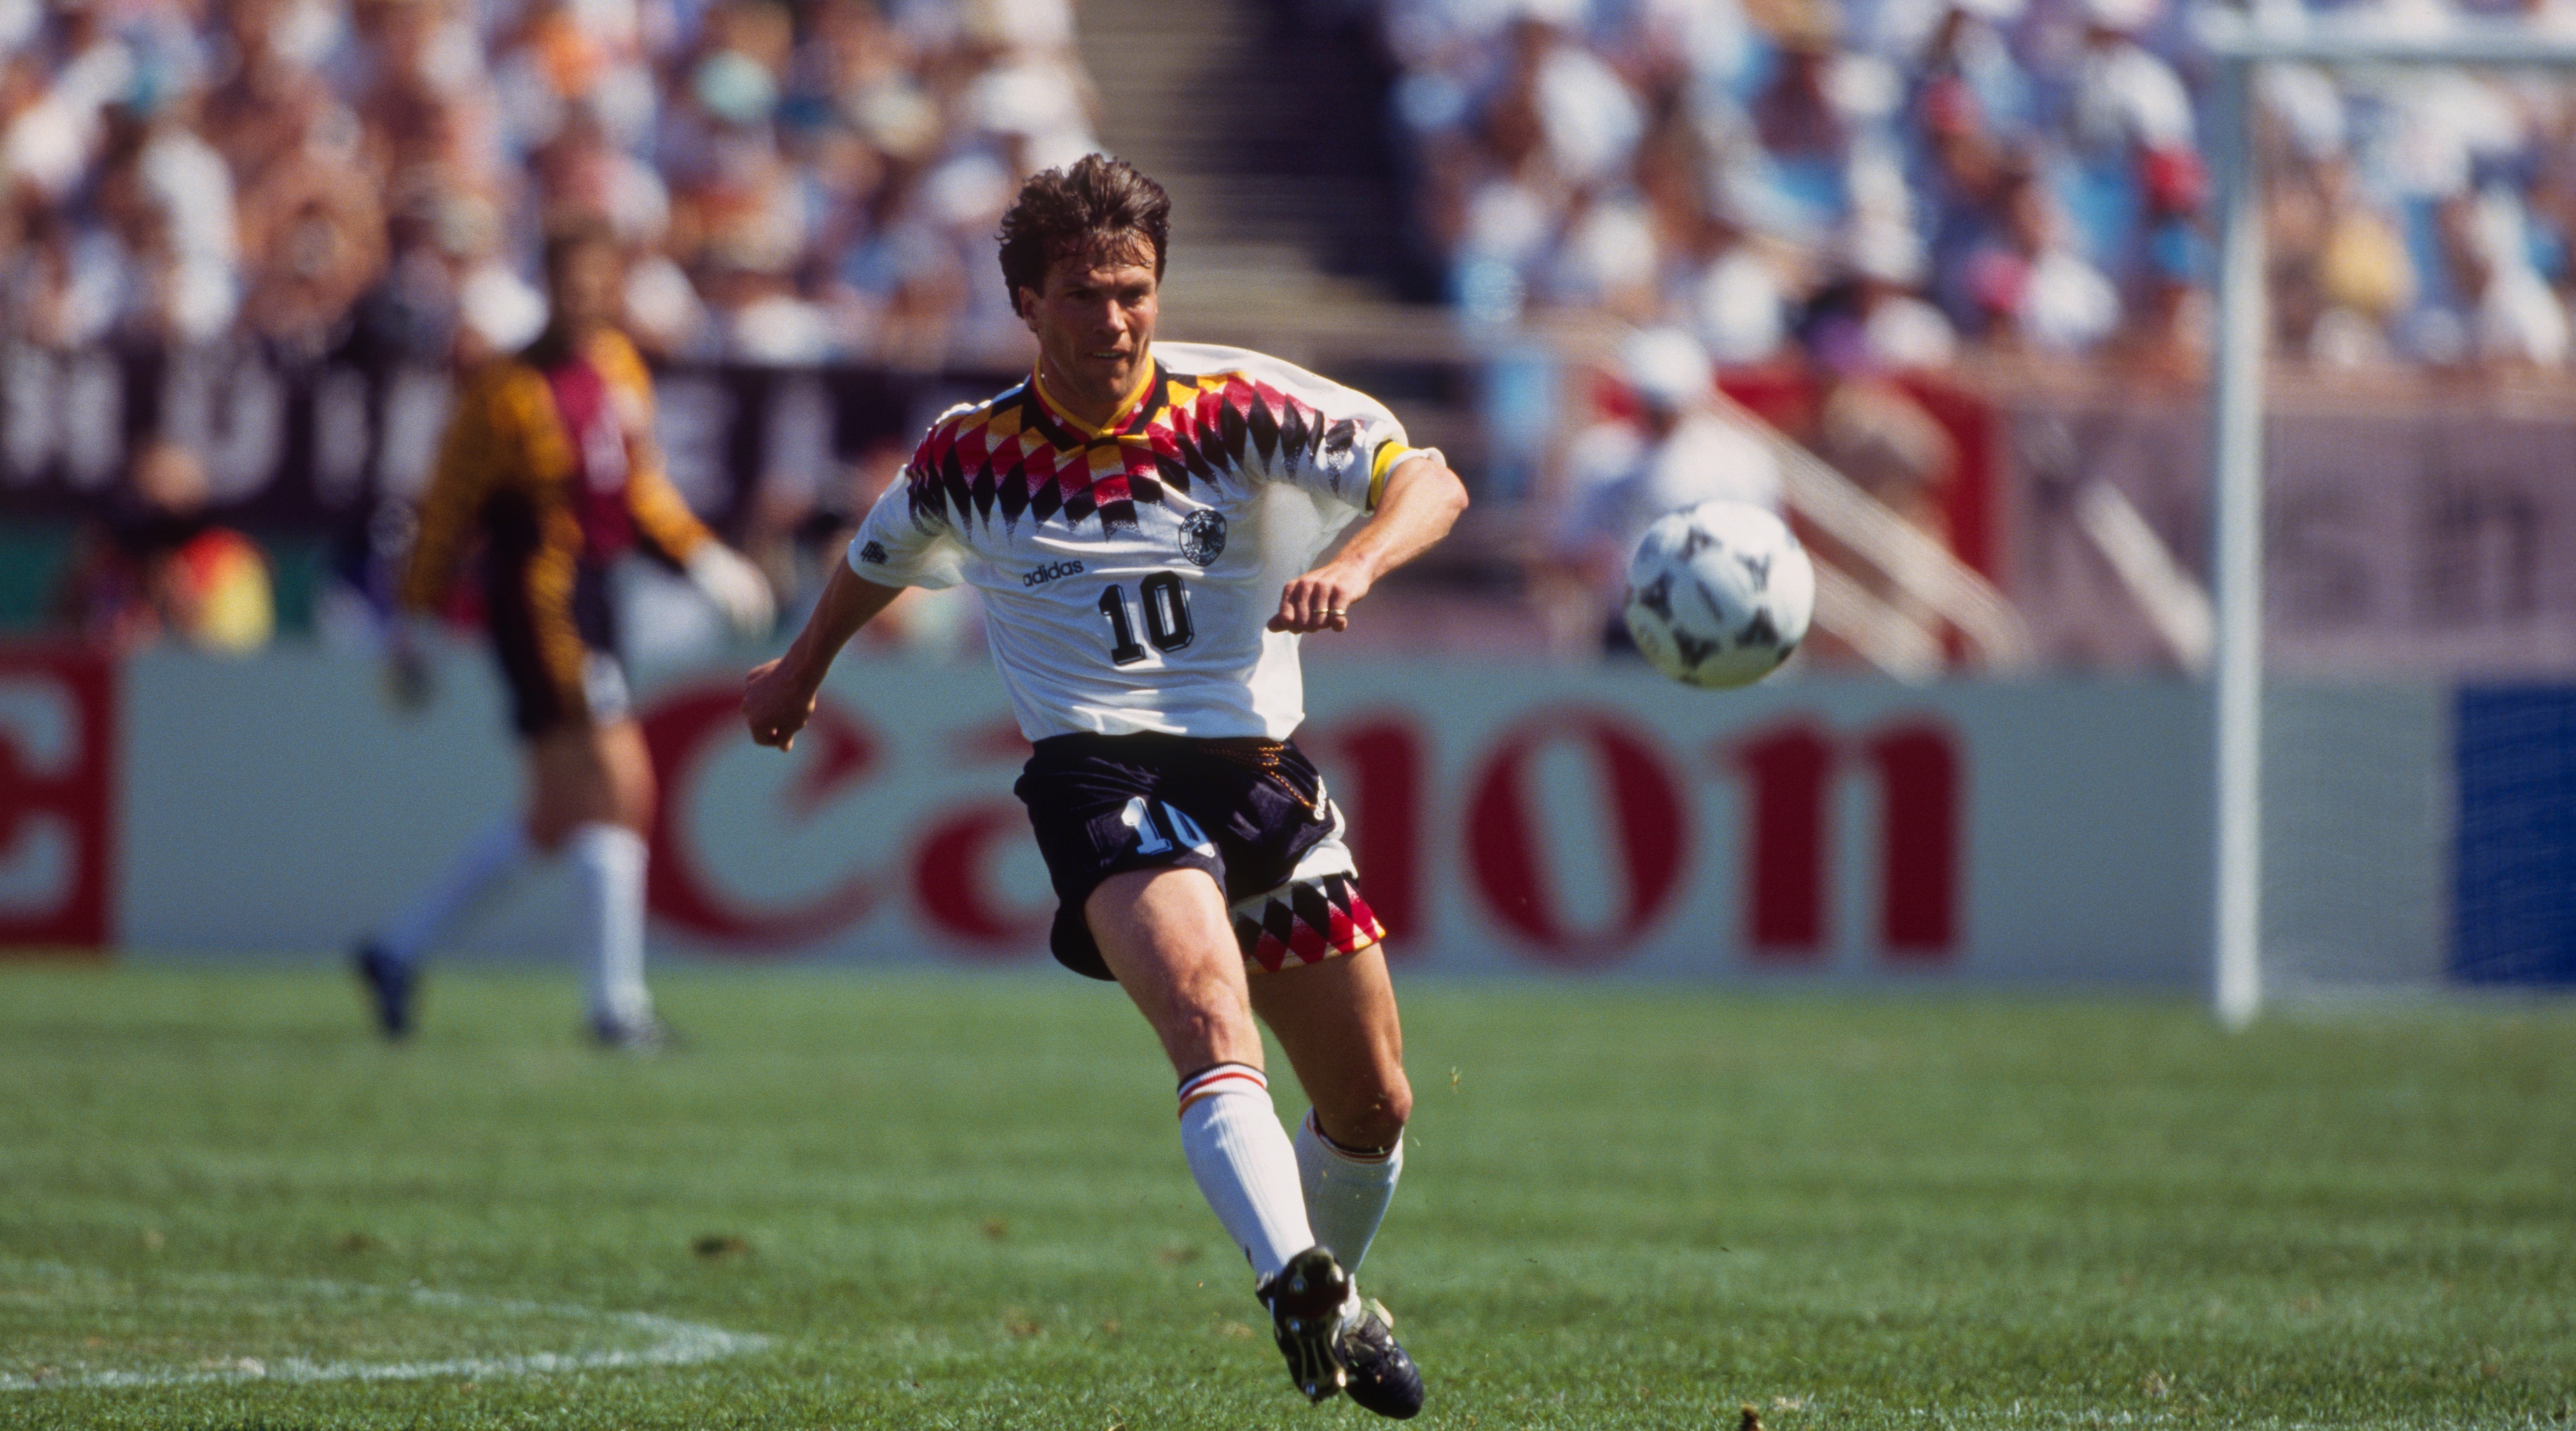 Lothar Matthaus (Germany) in action during a first round match of the 1994 FIFA World Cup against Spain (1-1). (Photo by Christian Liewig/TempSport/Corbis via Getty Images)